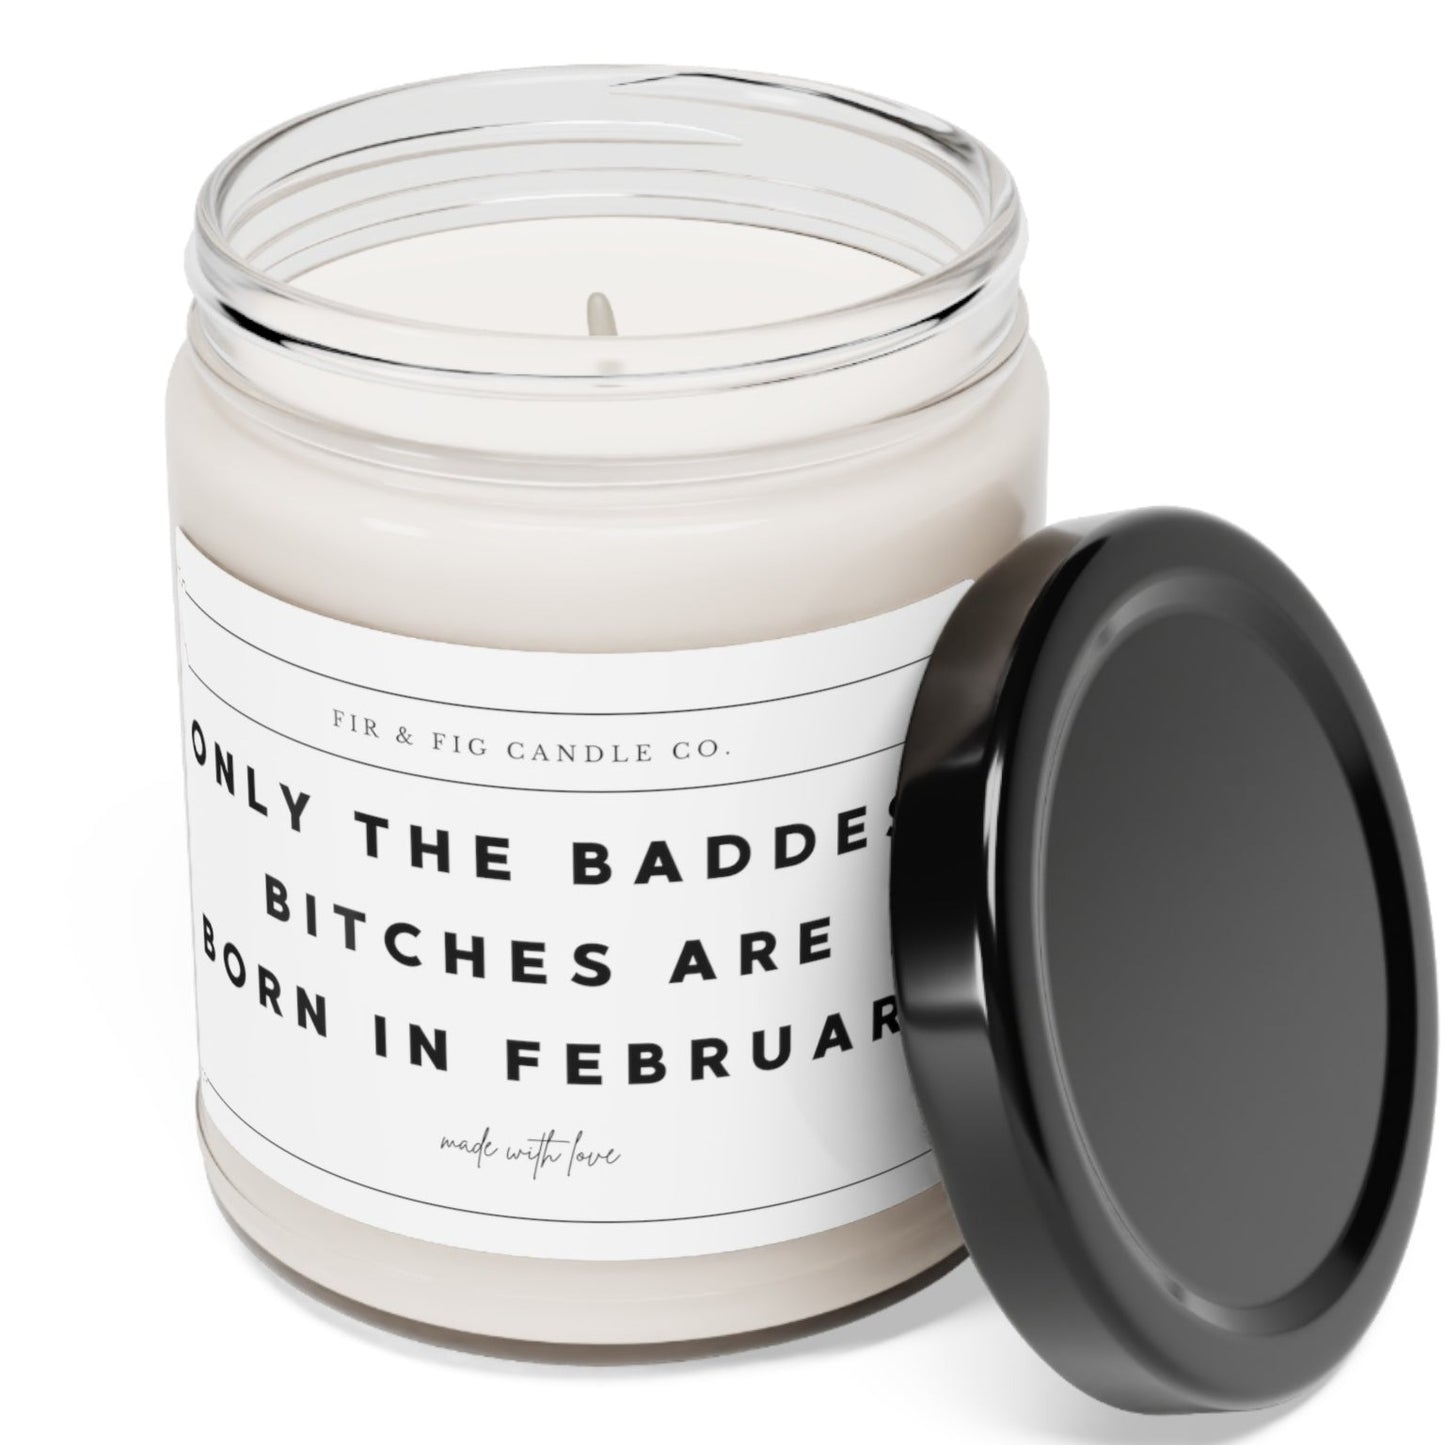 Only the Baddest Bitches are born in February - friend gift, February gift, gift for her, candle gift for her, Aquarius Gift, Pisces Gift